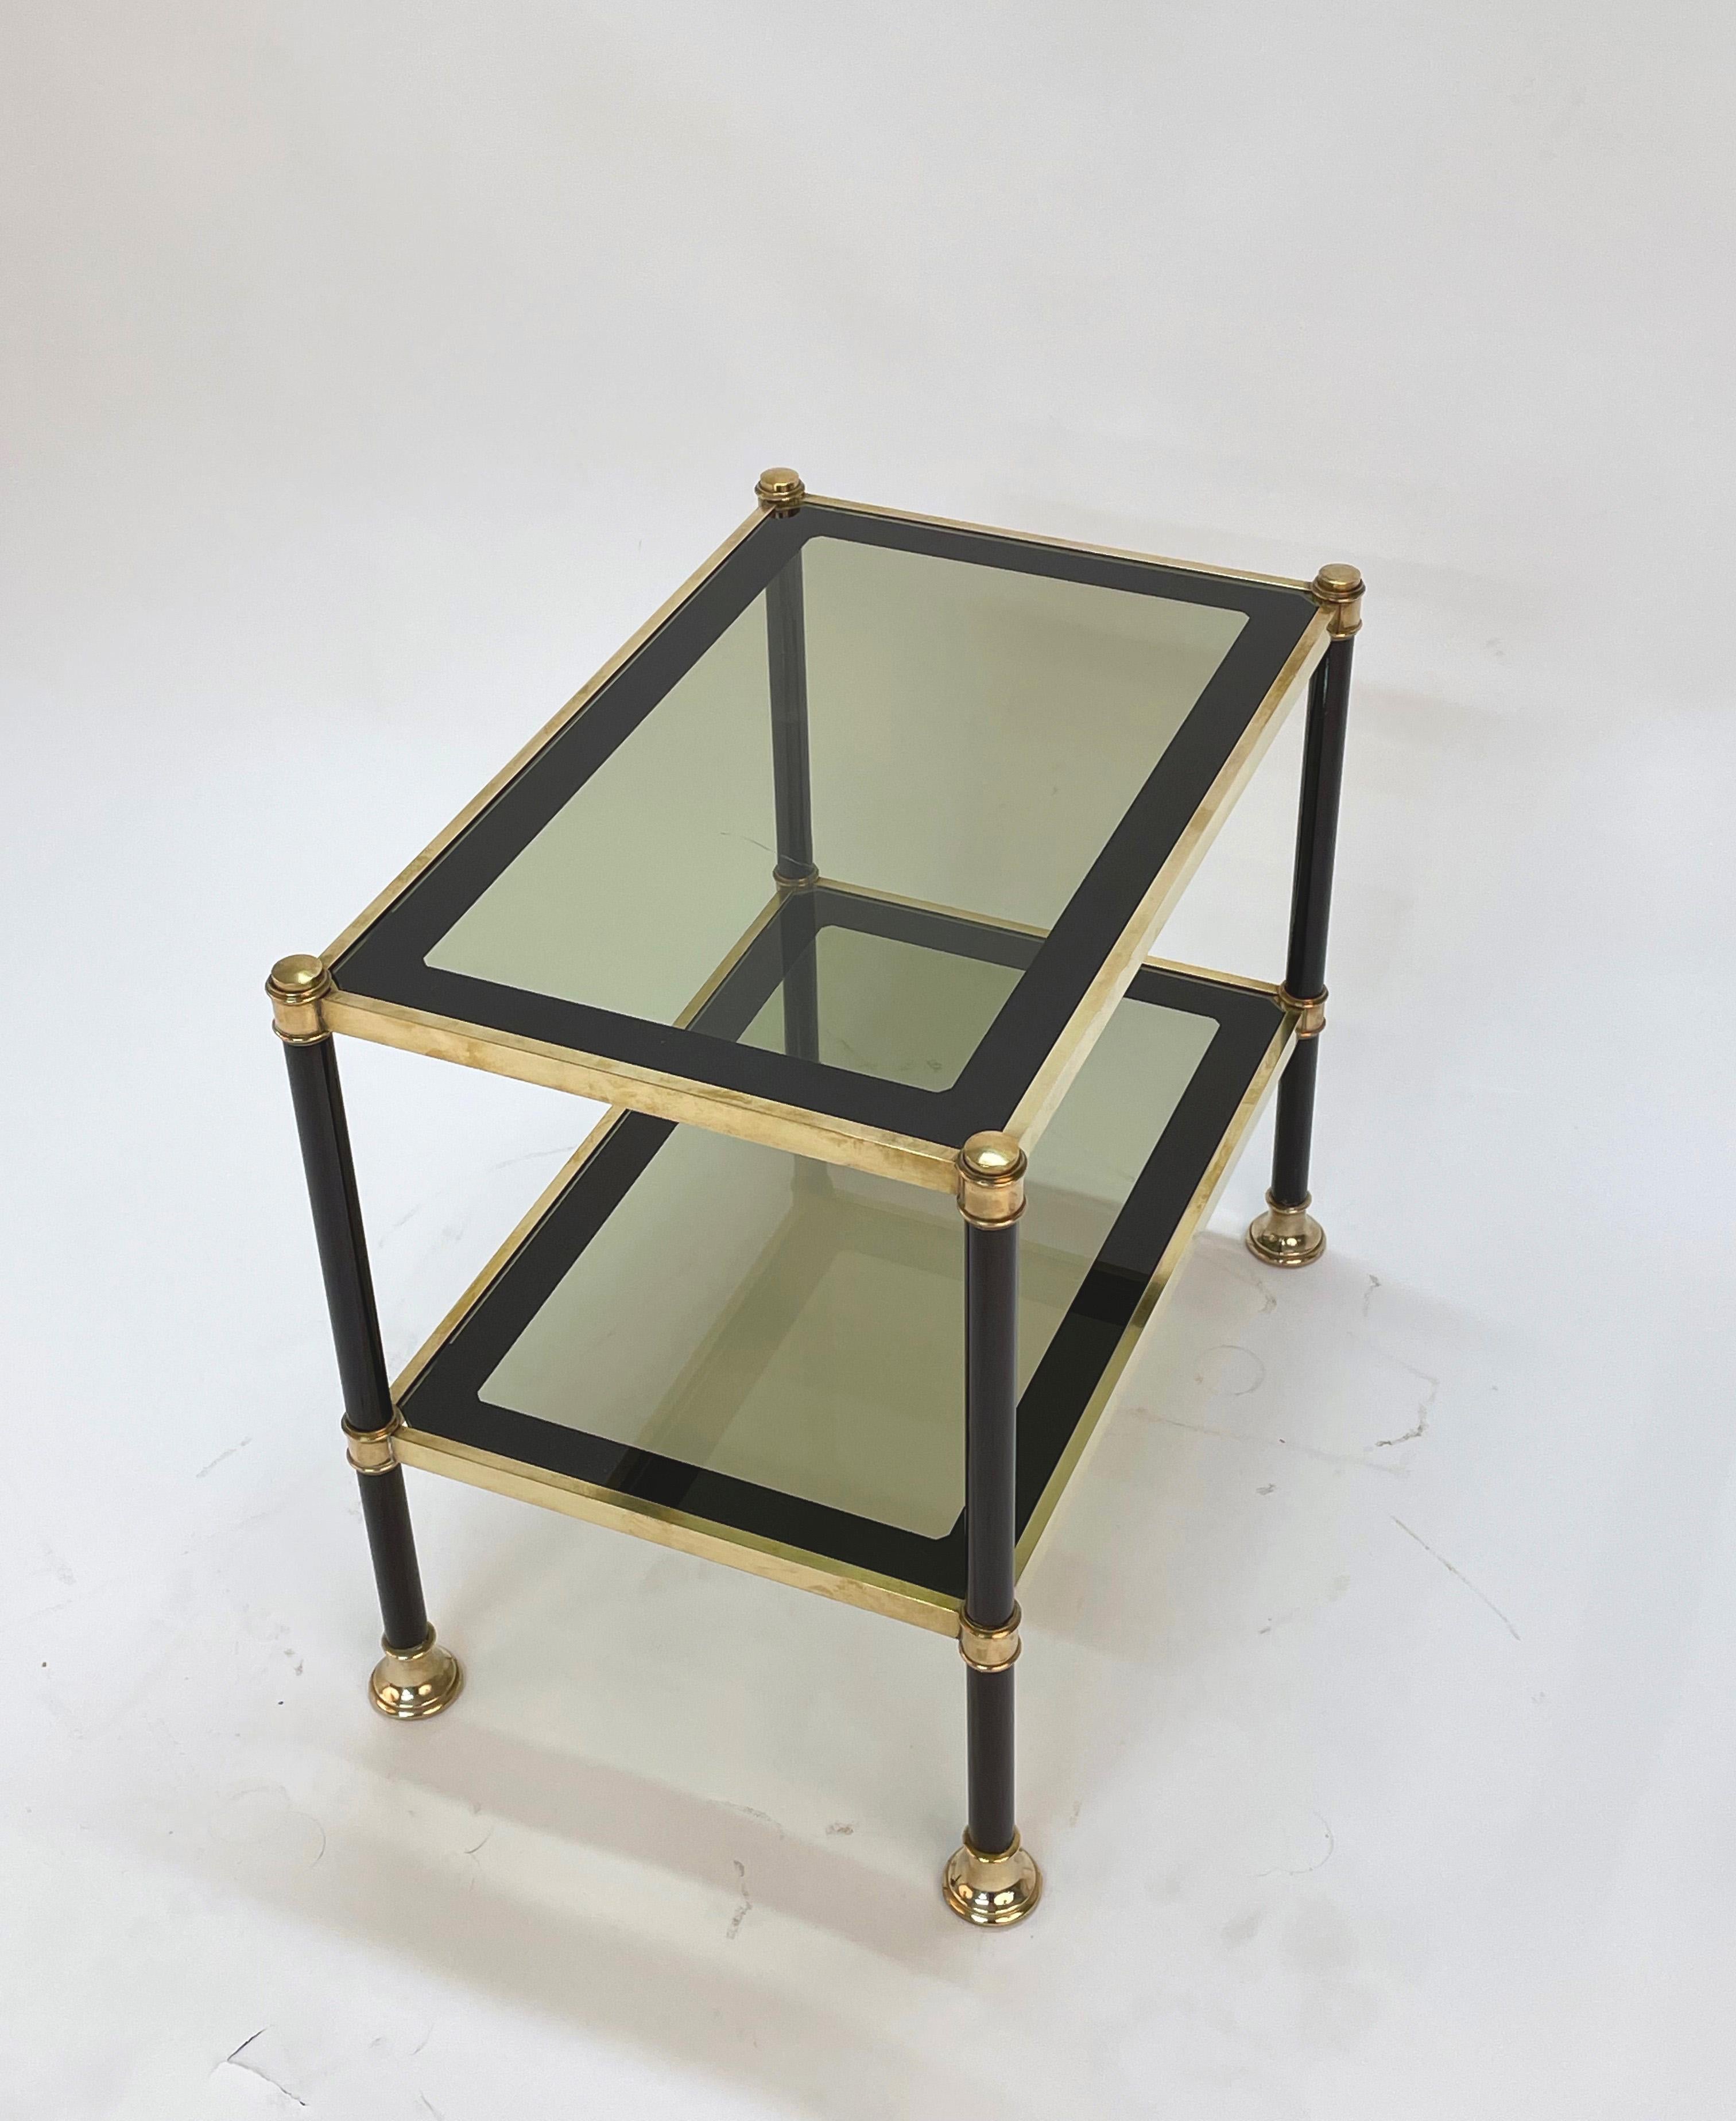 Midcentury Brass and Black Metal Rectangular Coffee Table with Smoked Glass 1970 For Sale 5